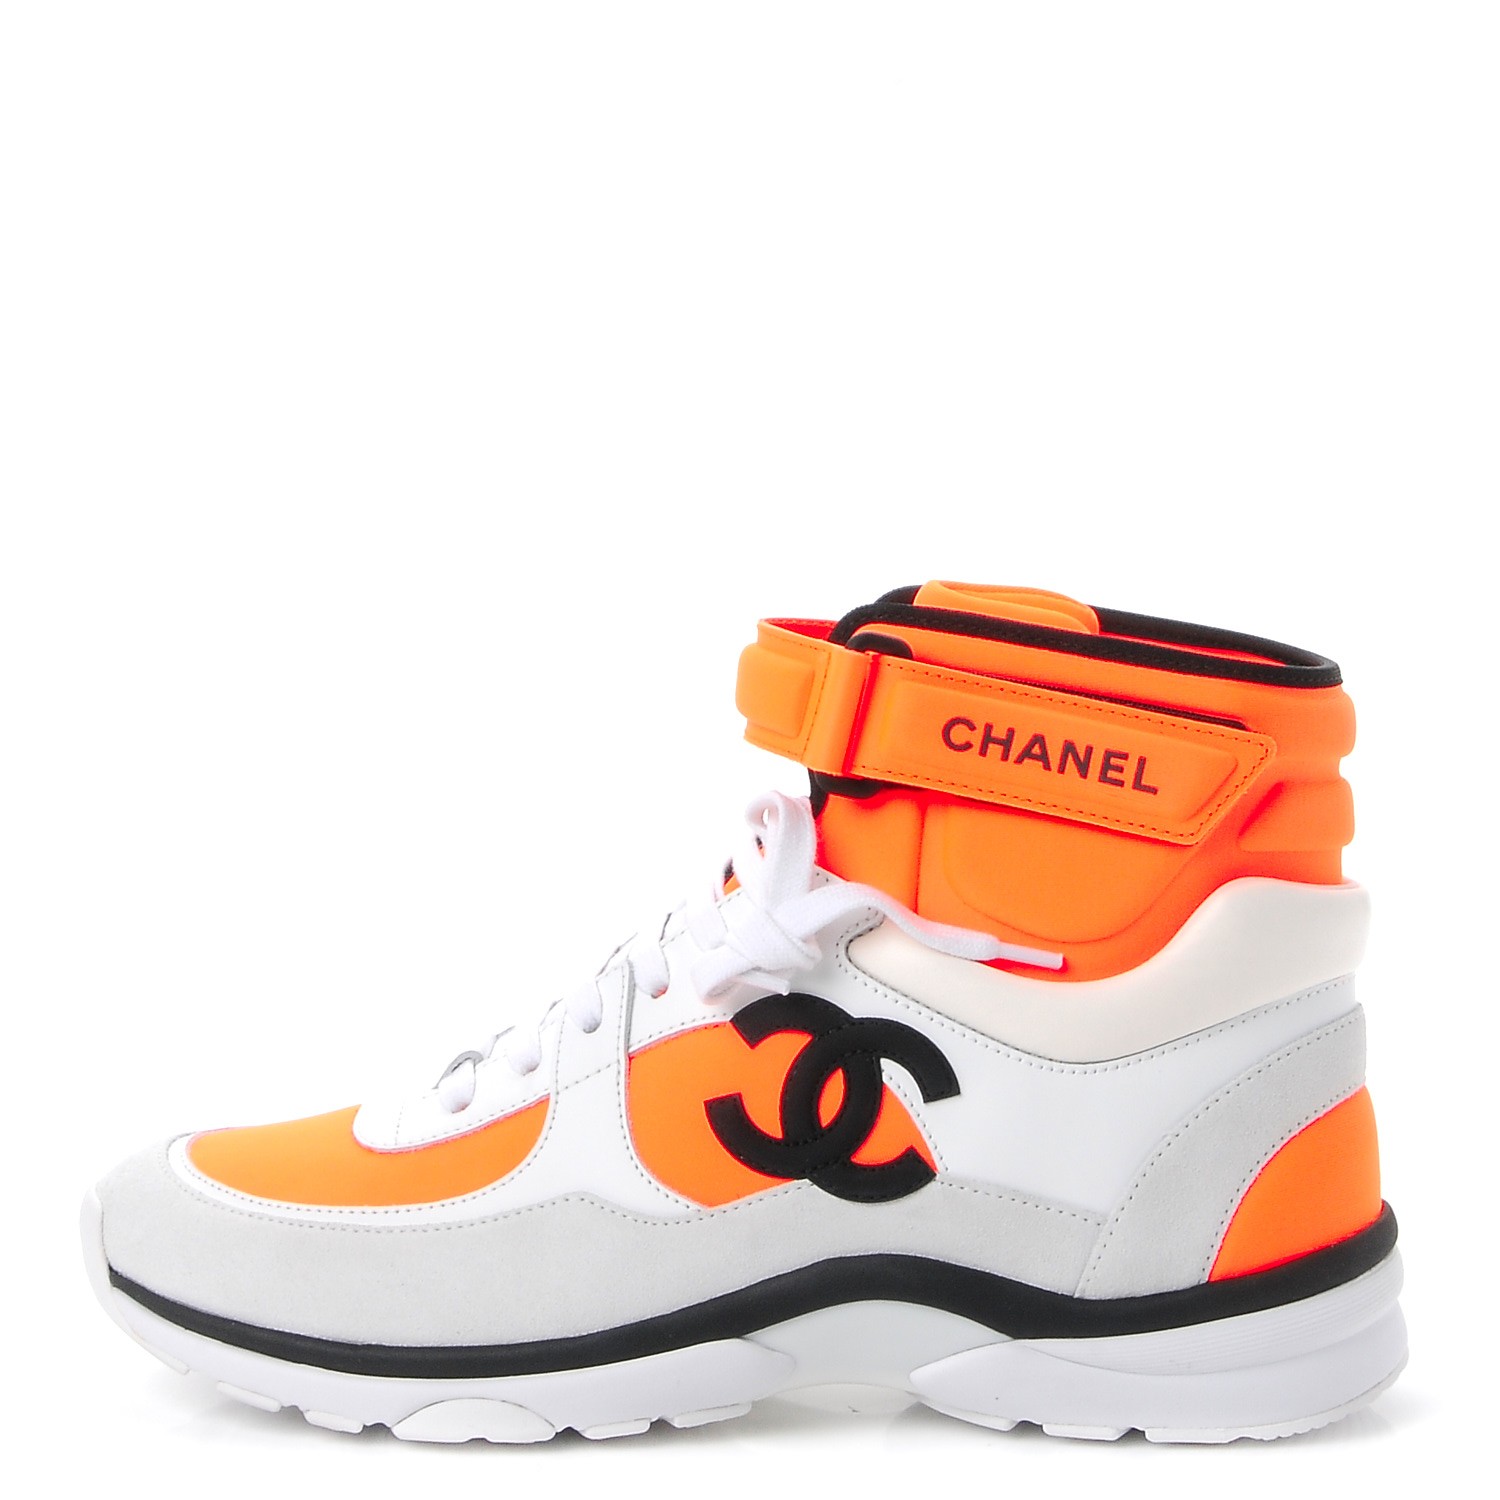 chanel orange and white sneakers